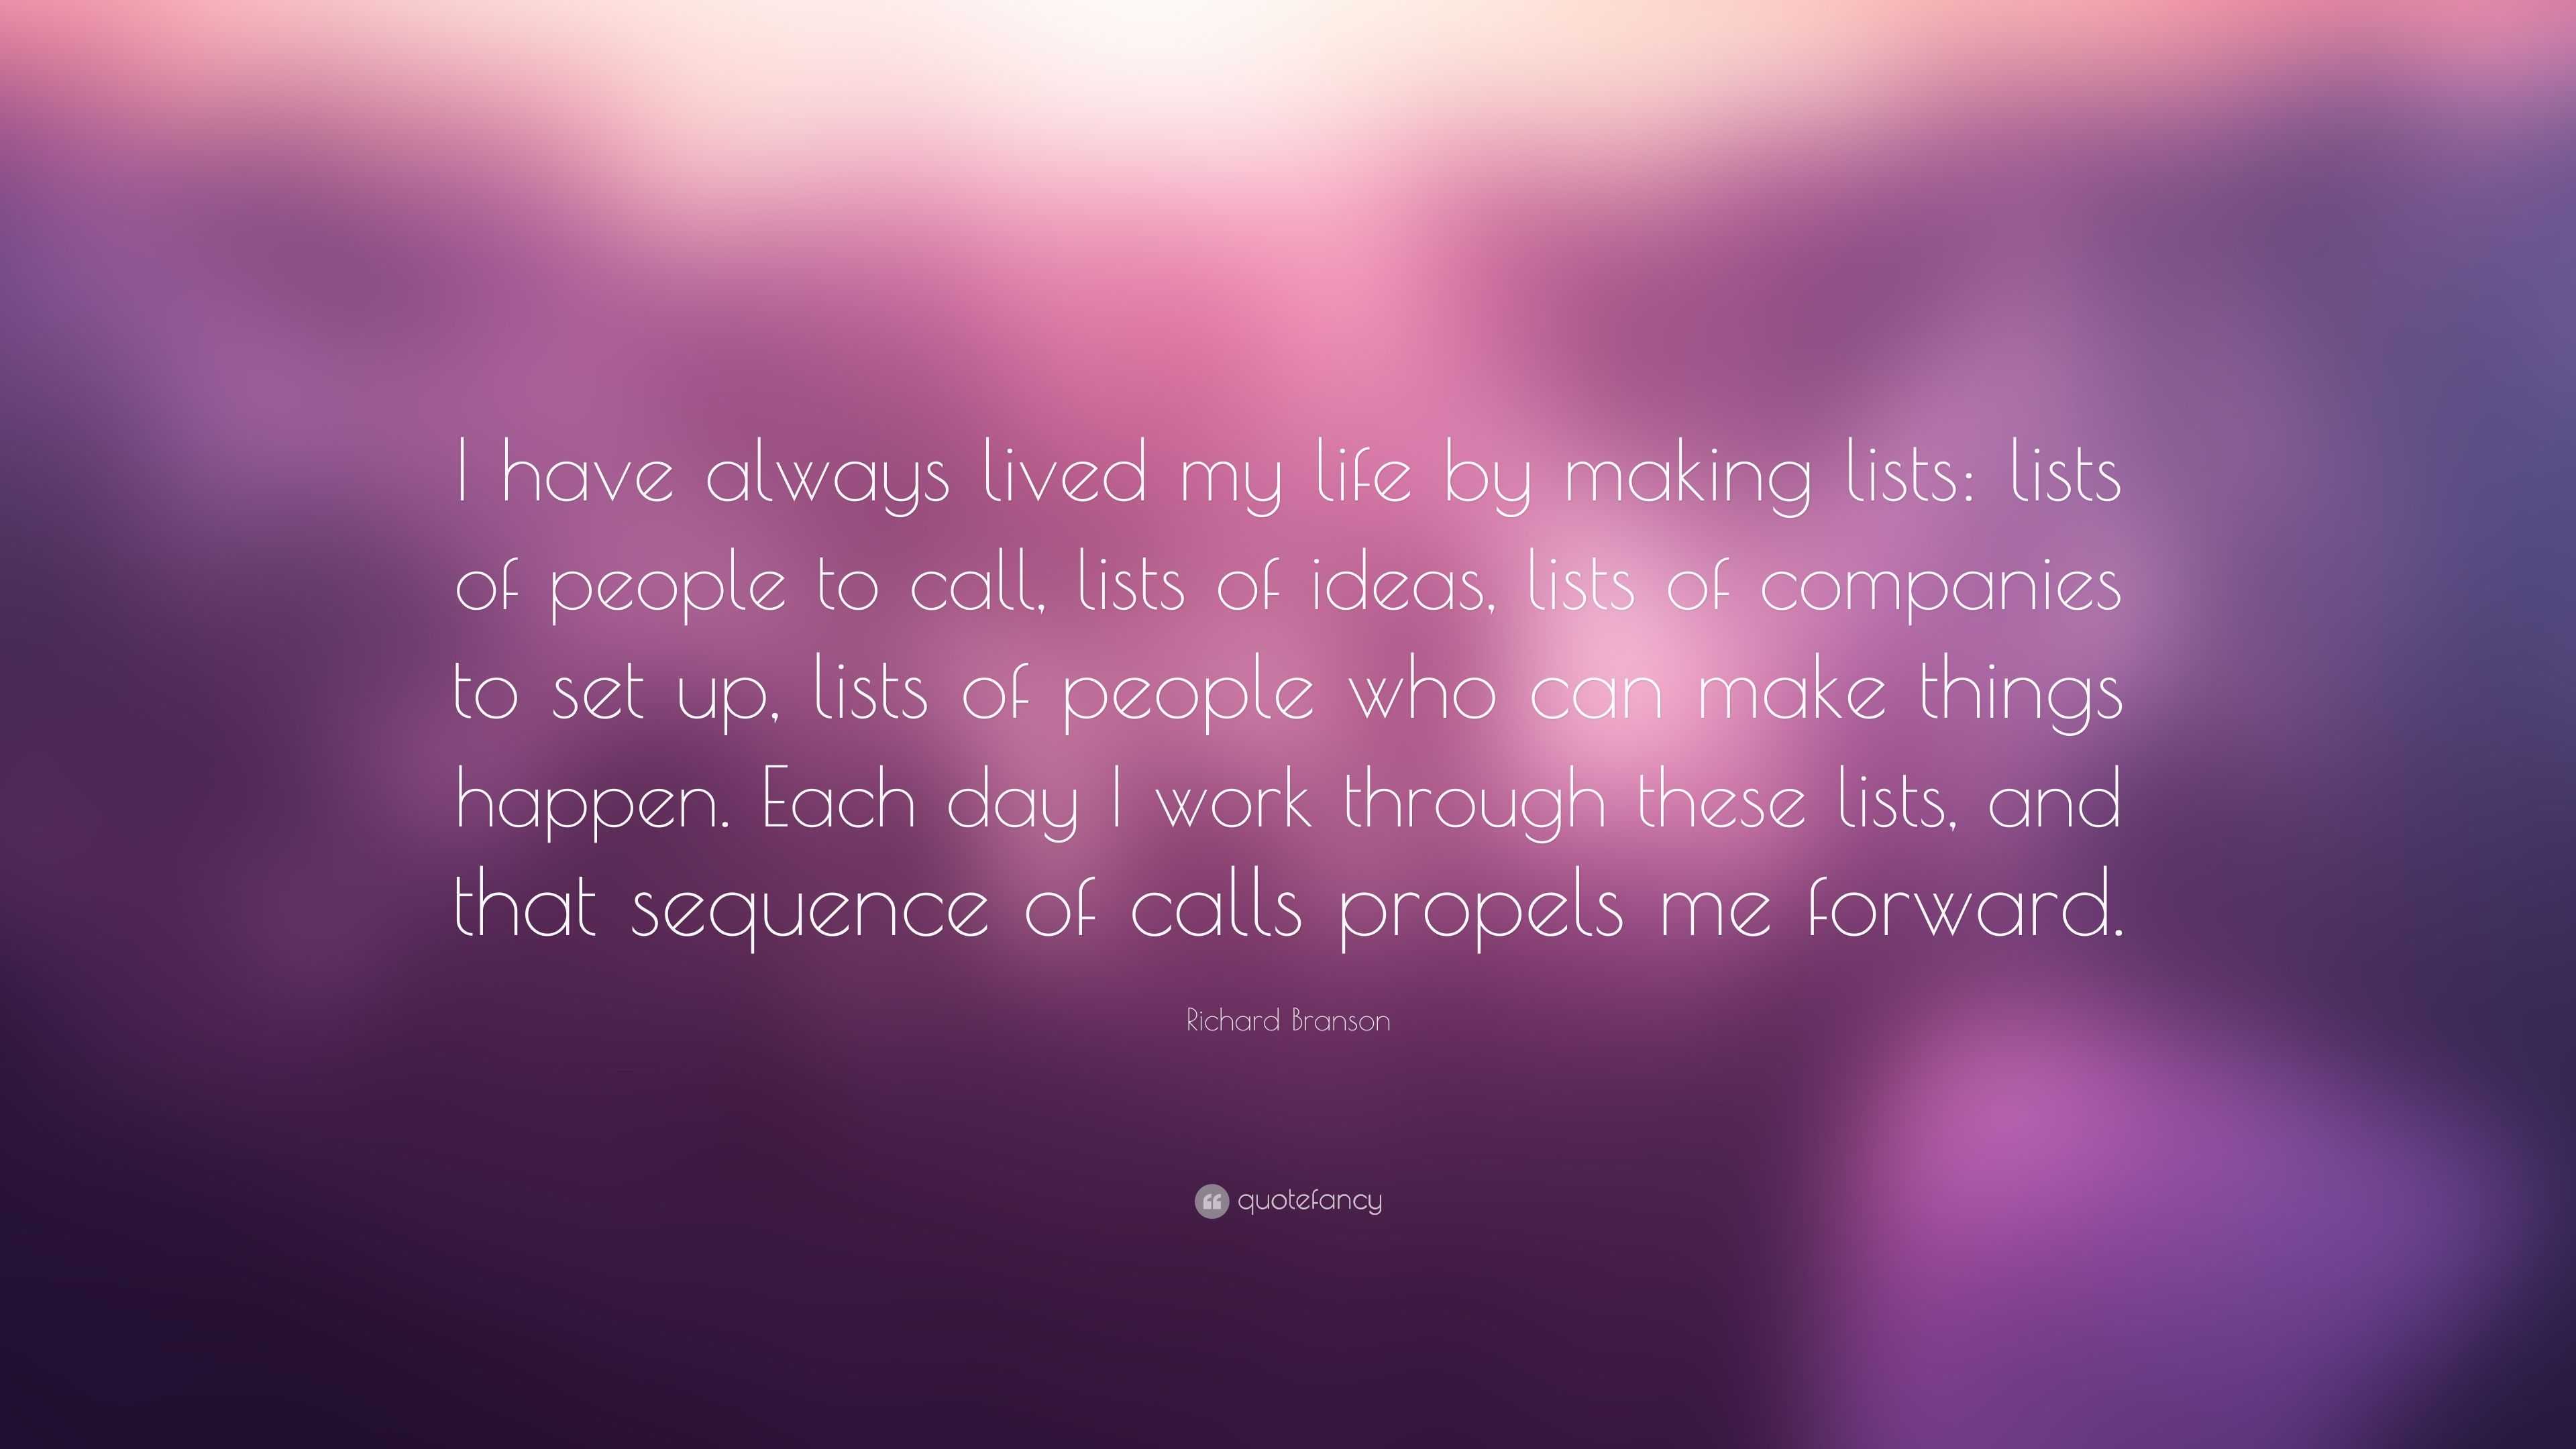 Richard Branson Quote: “I have always lived my life by making lists ...